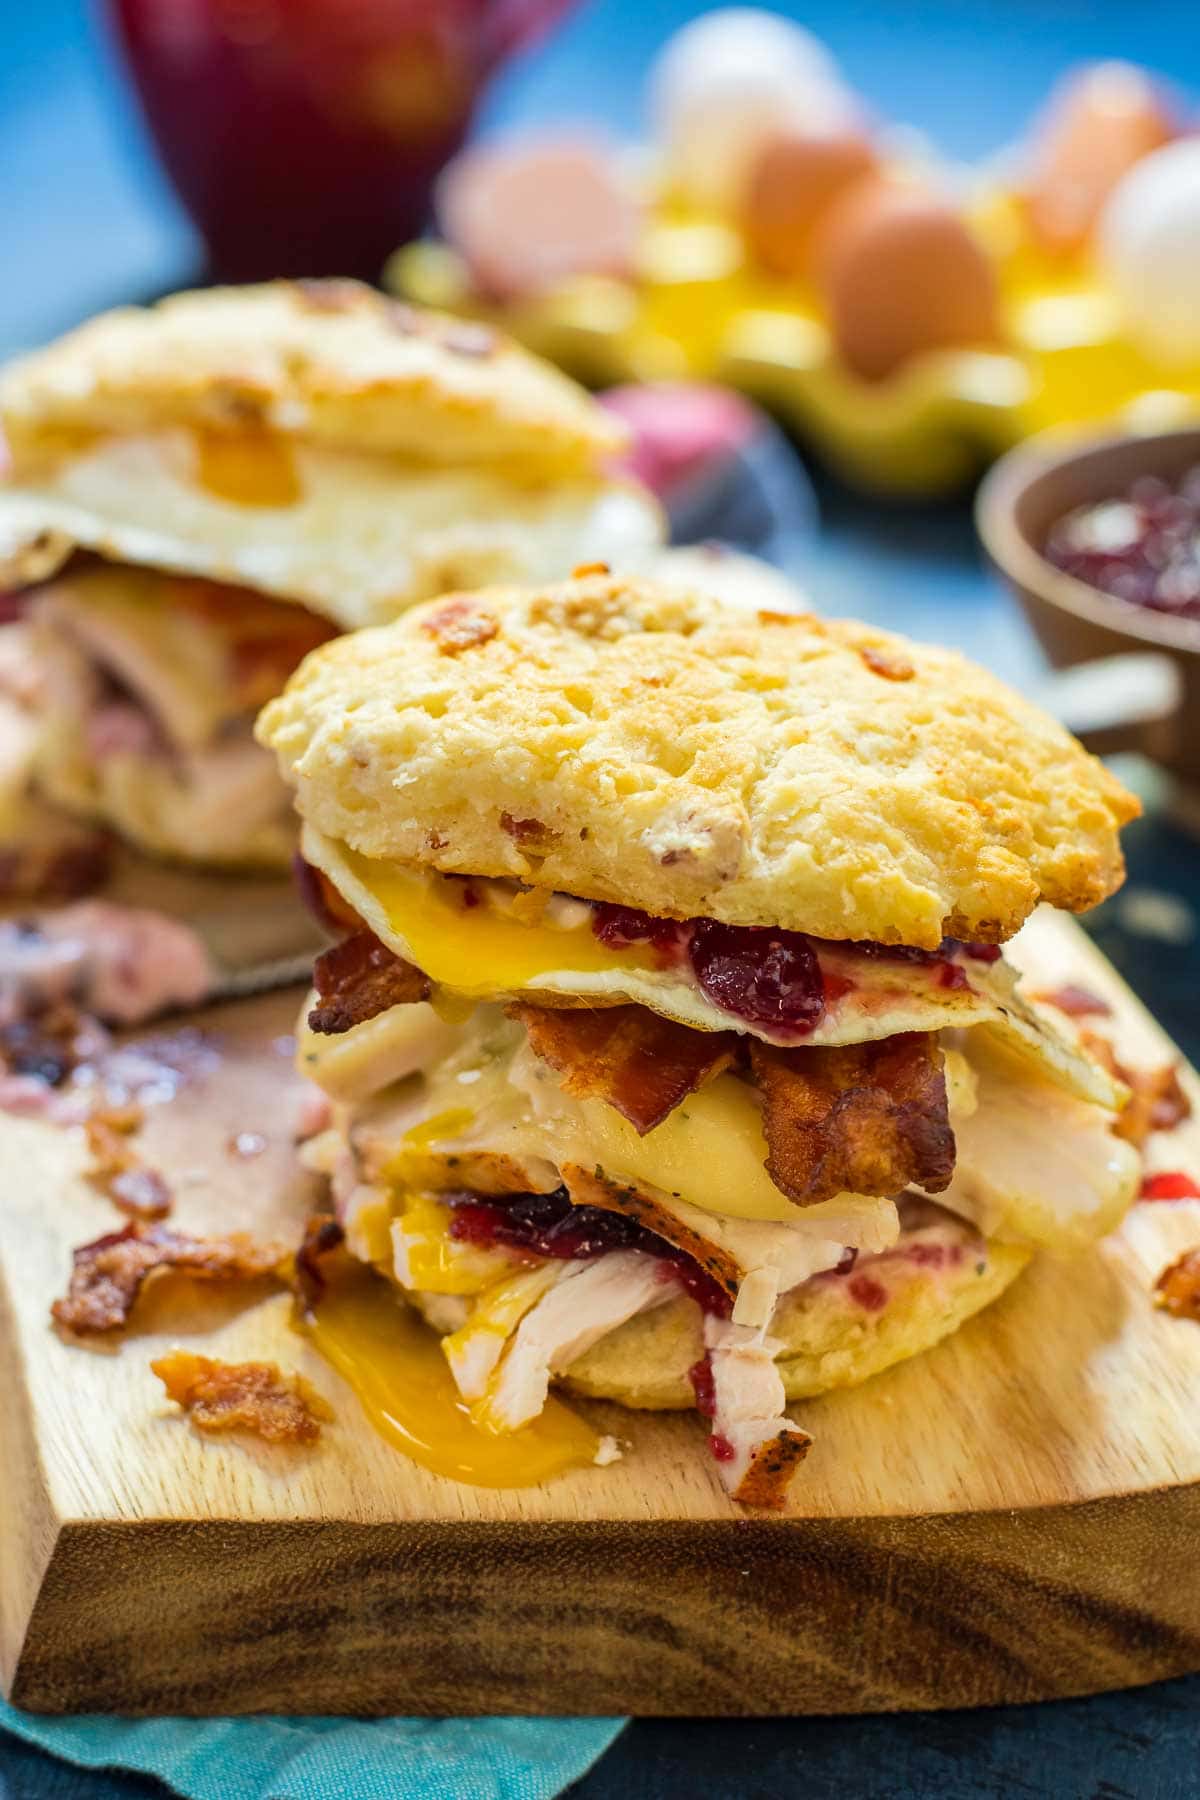 This Turkey Egg and Bacon Breakfast Sandwich with Cranberry Mayo is perfect for Thanksgiving leftovers!